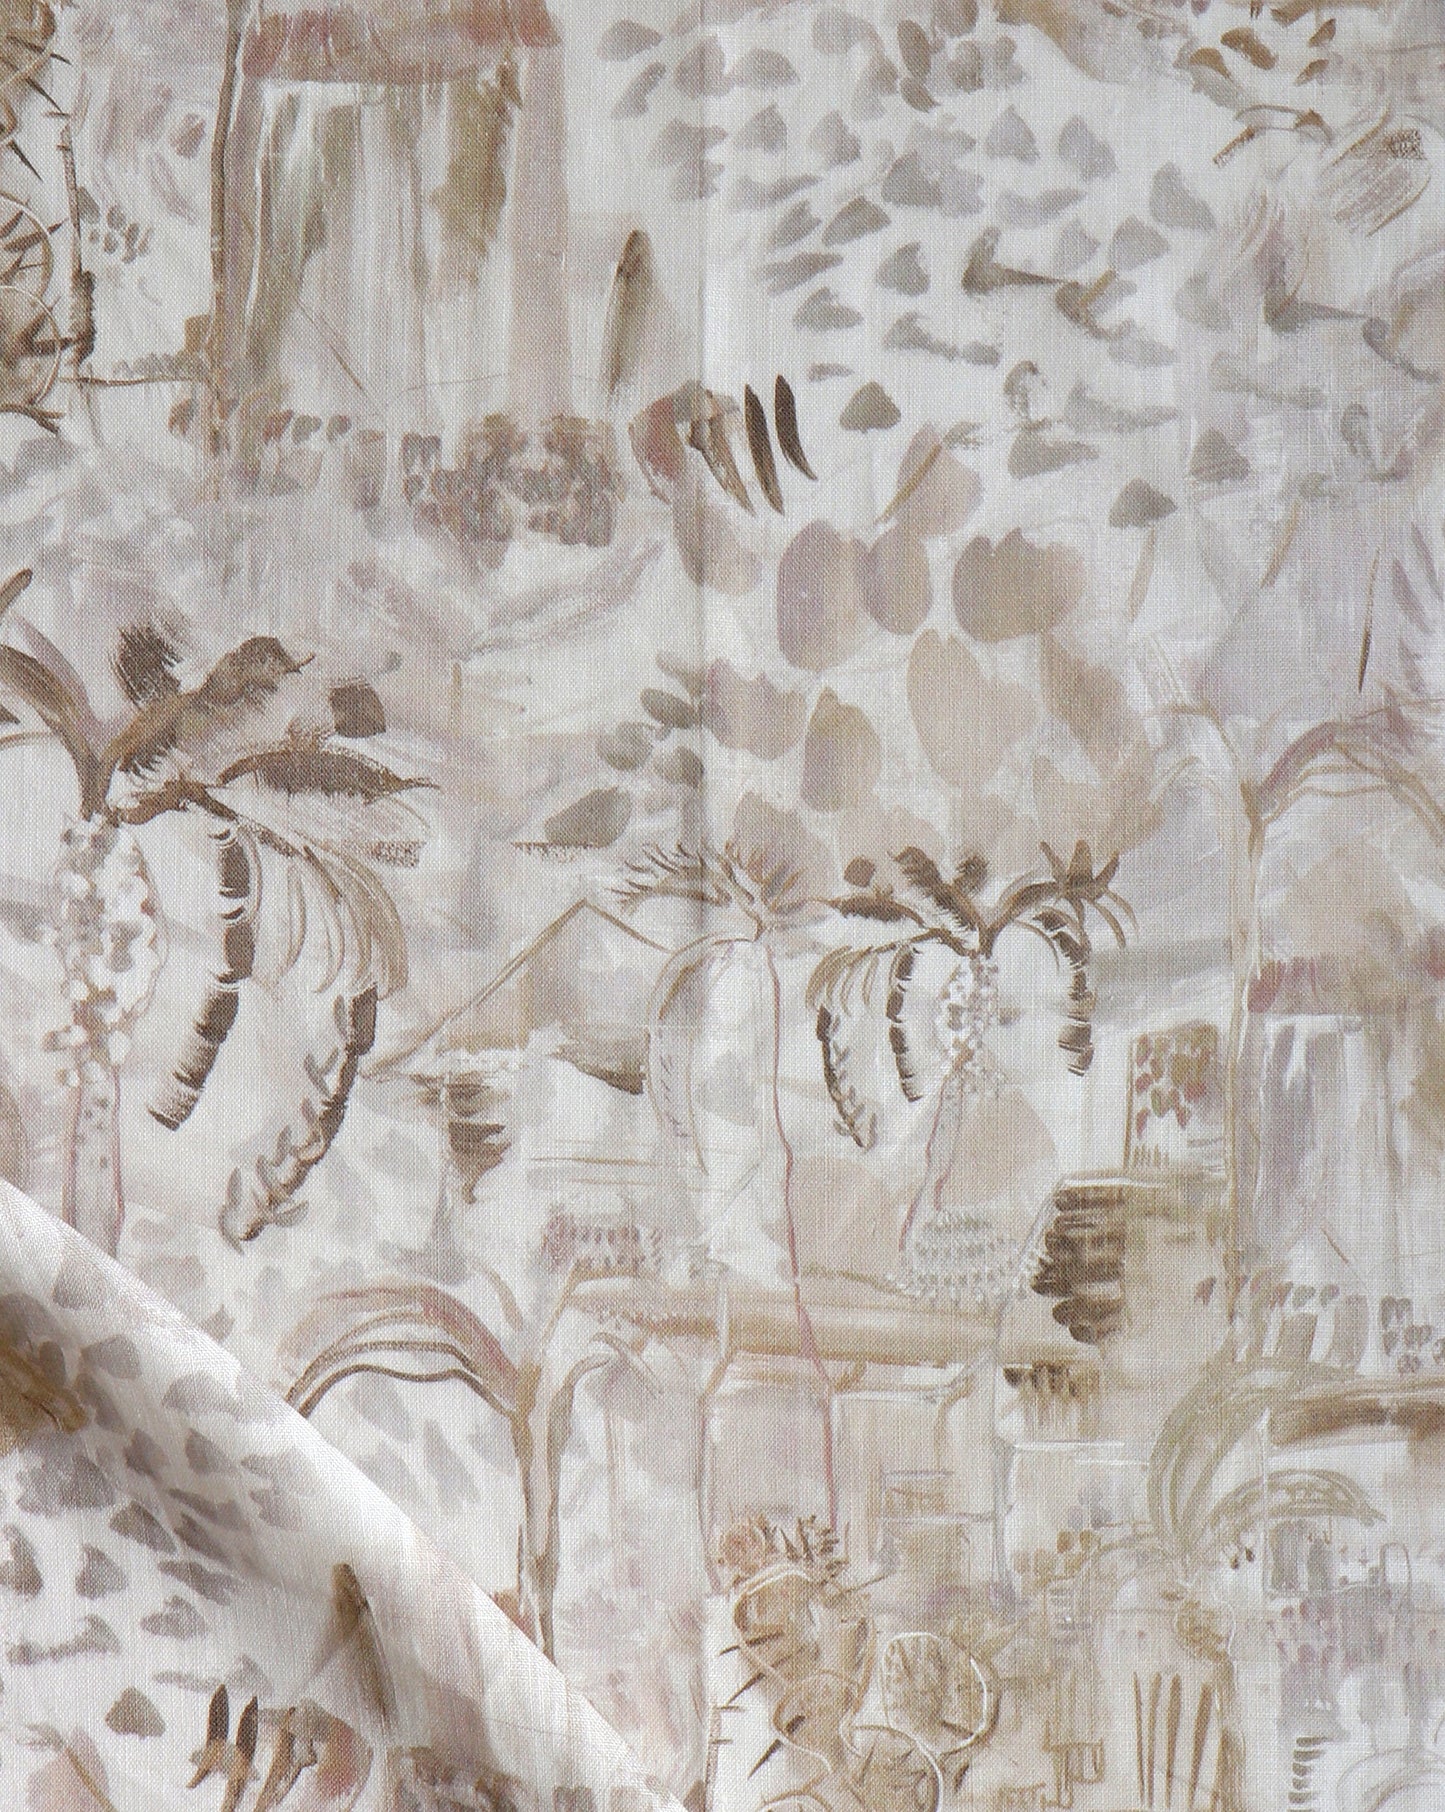 An image of a beige and brown Souk Fabric featuring a palm tree from Marrakech.